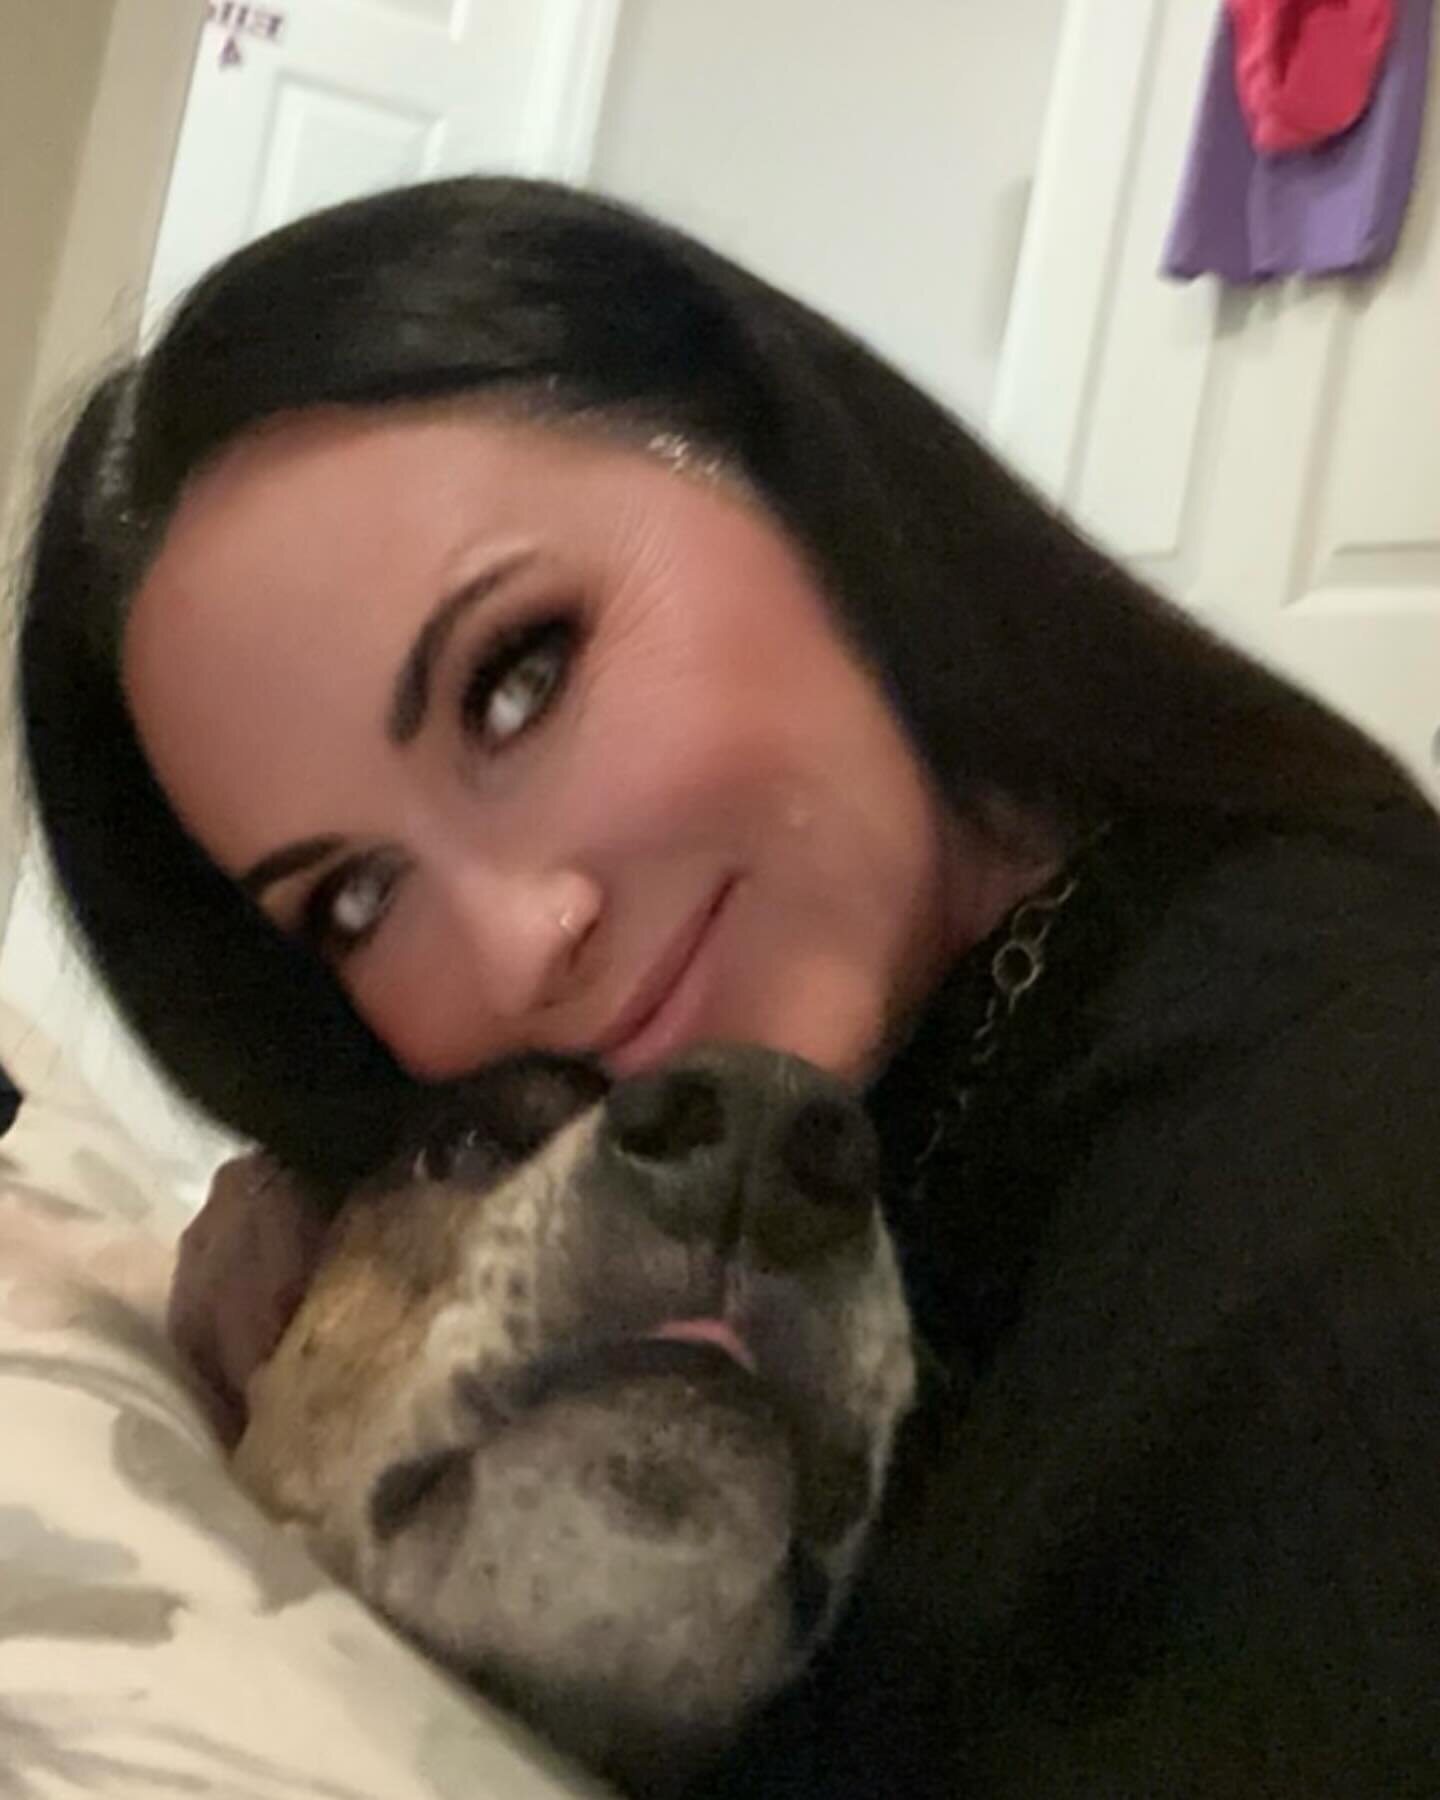 ⭐️ TODAY&rsquo;S FOSTER SPOTLIGHT!!! ⭐️

Faith DiPersio , RN and medical foster for over 15 years. Currently an aesthetic nurse educator with EndyMed and full time doggy mom to 4 rescue pups!!! 🐶🐶🐶🐶 Faith is an experienced special needs medical f